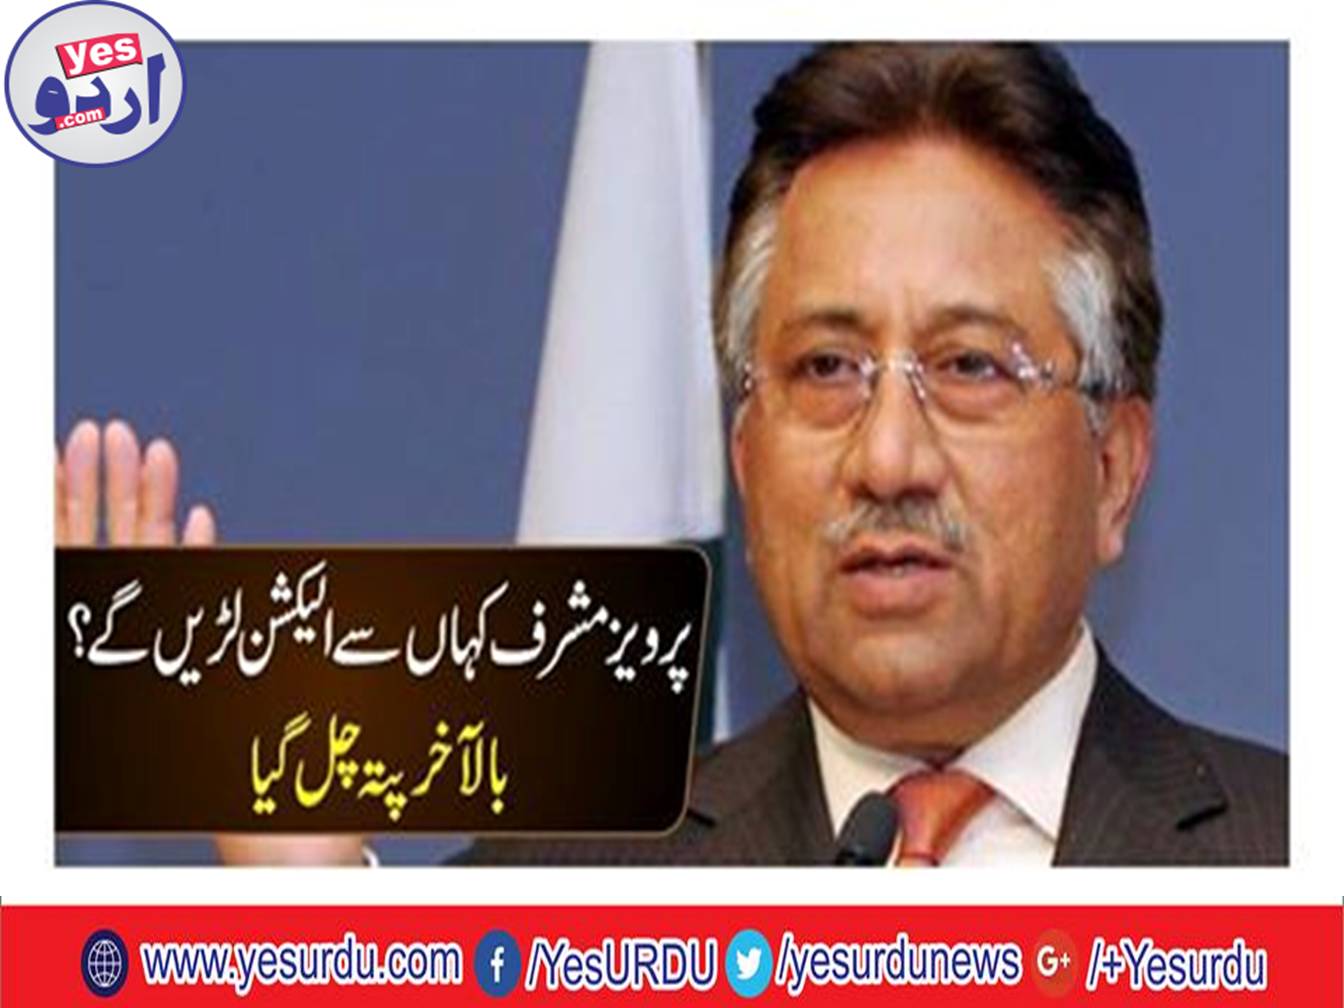 From where will Pervez Musharraf contest in elections?